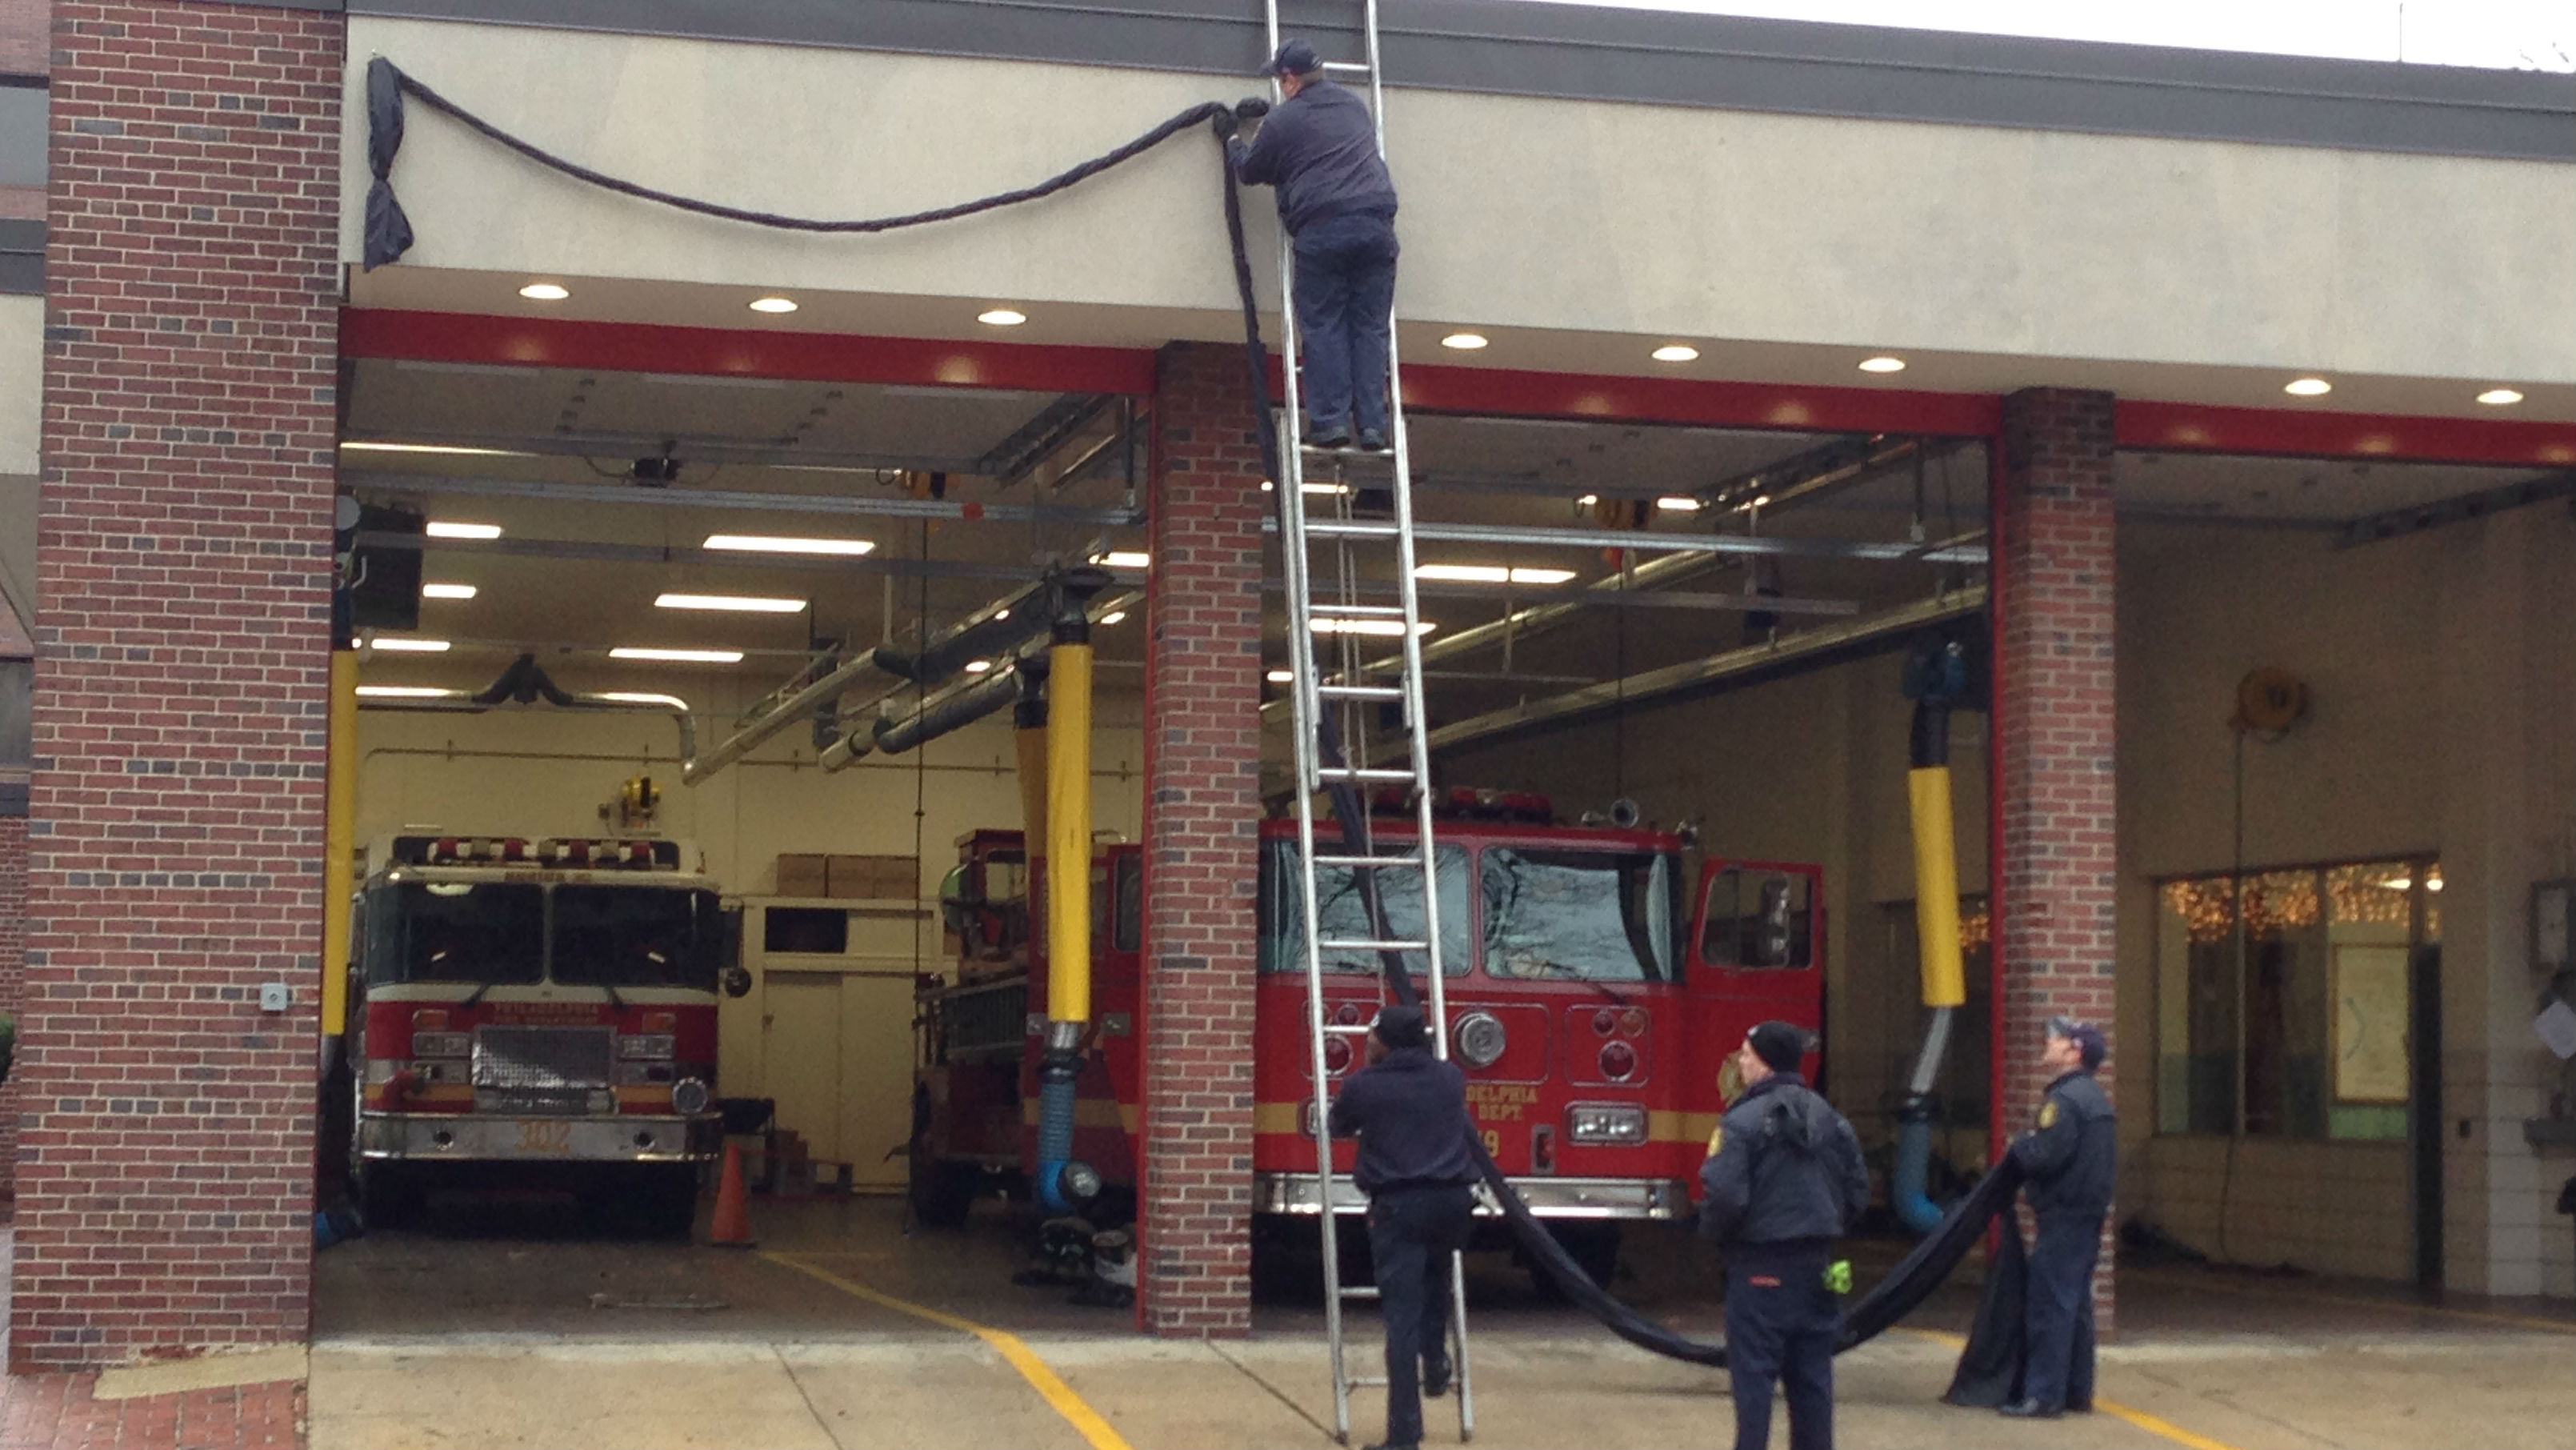 Firefighters put up a black bunting at the station on 4th and Arch later Tuesday morning. (Credit: Tony Hanson)